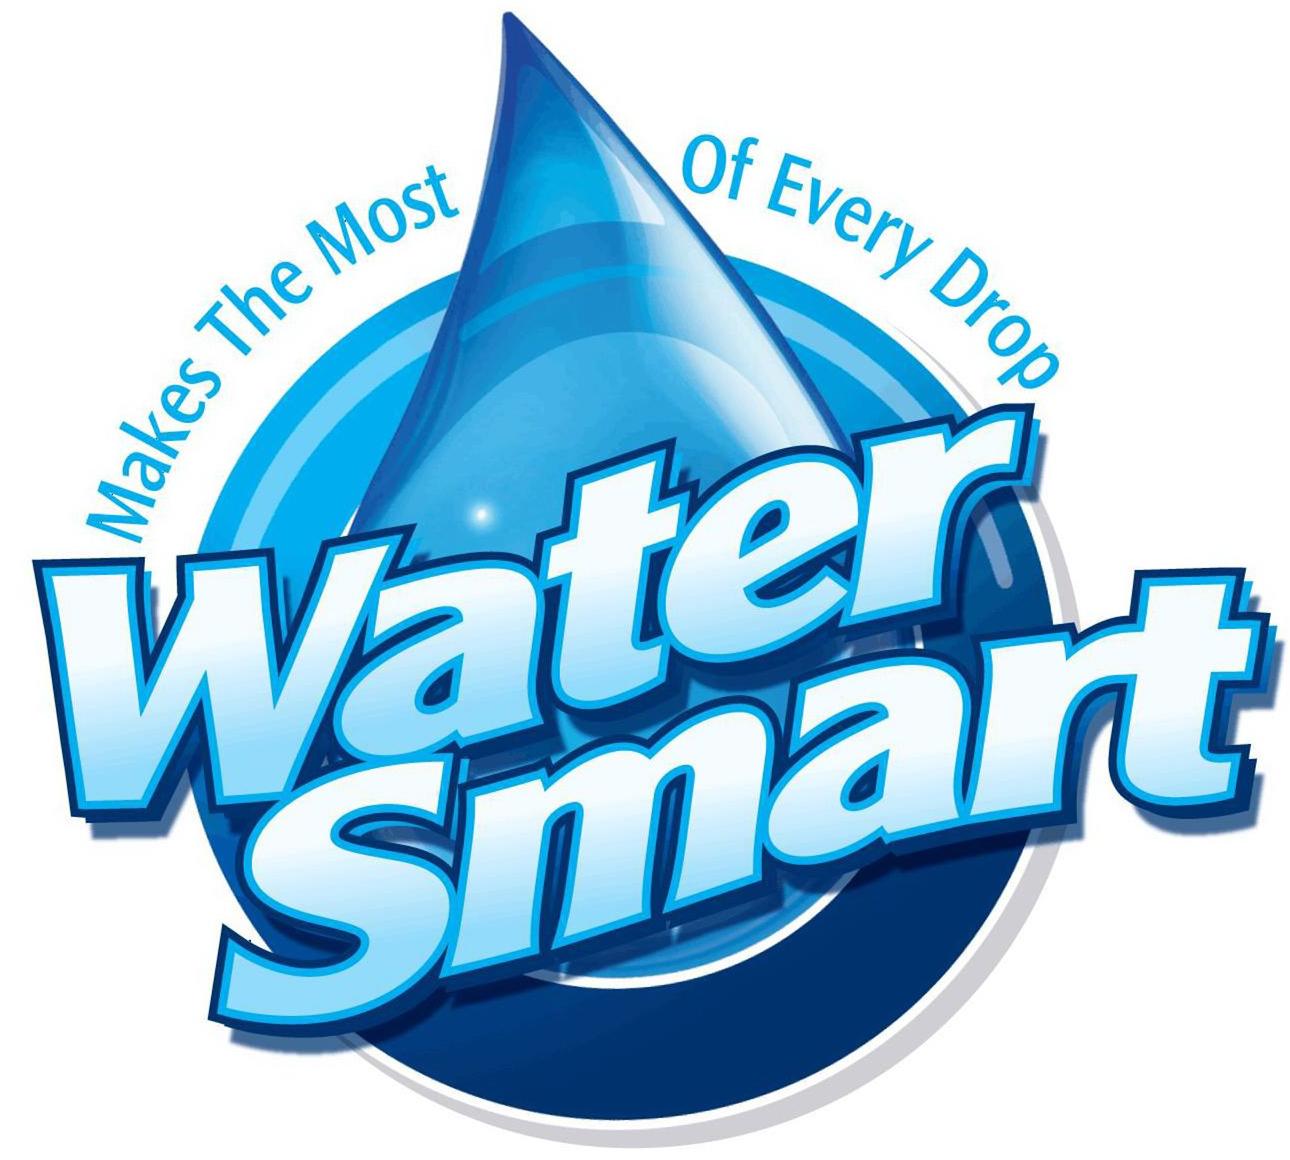  WATER SMART MAKES THE MOST OF EVERY DROP